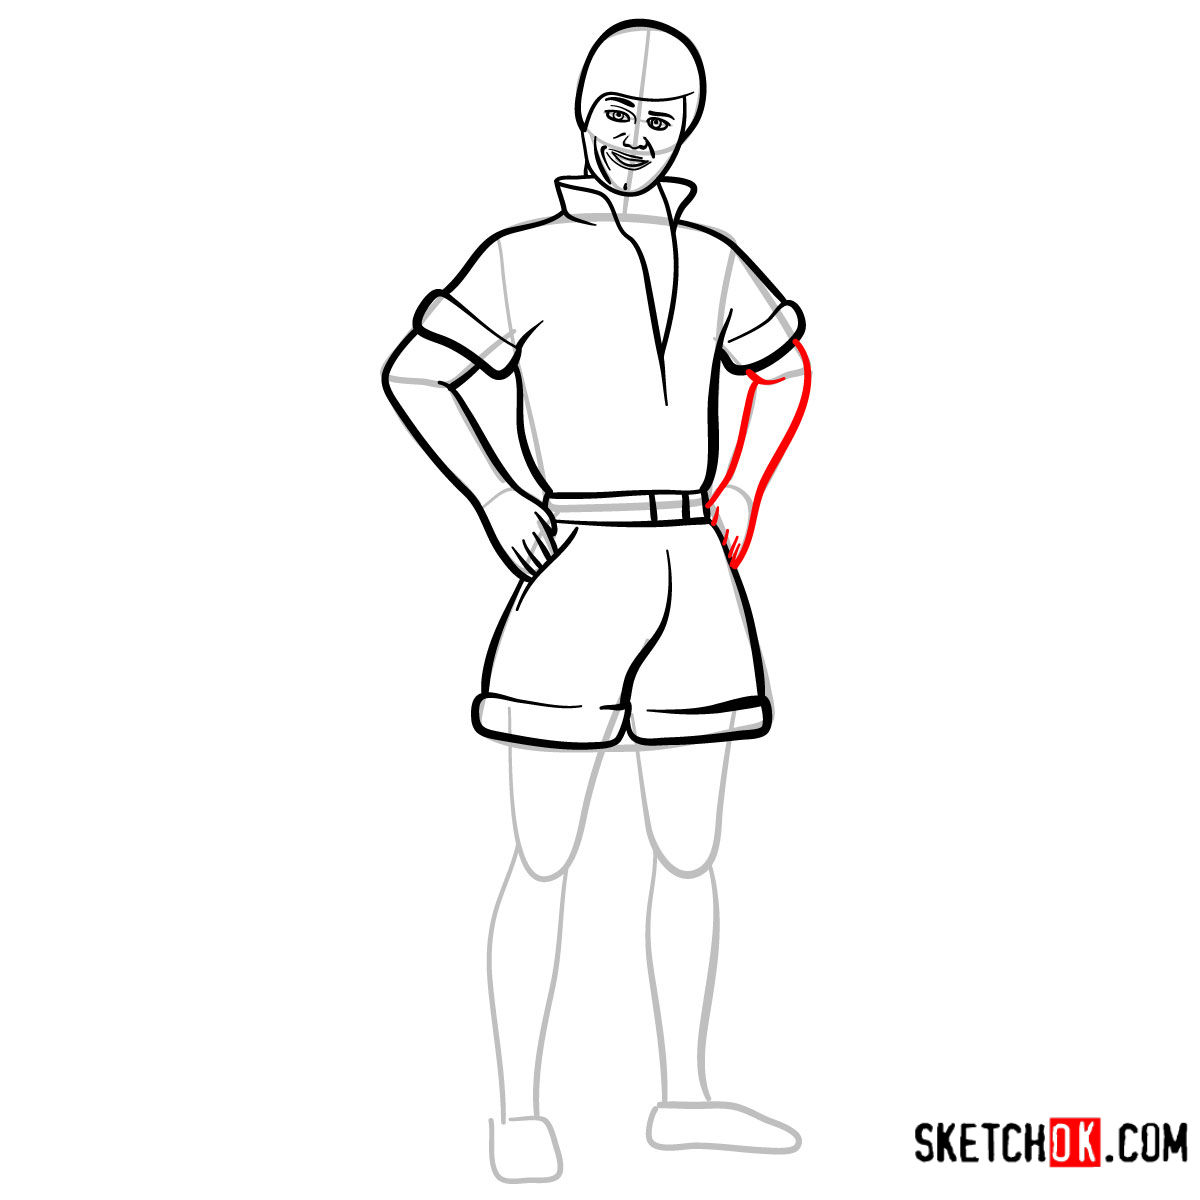 How to draw Ken from Toy Story - step 09